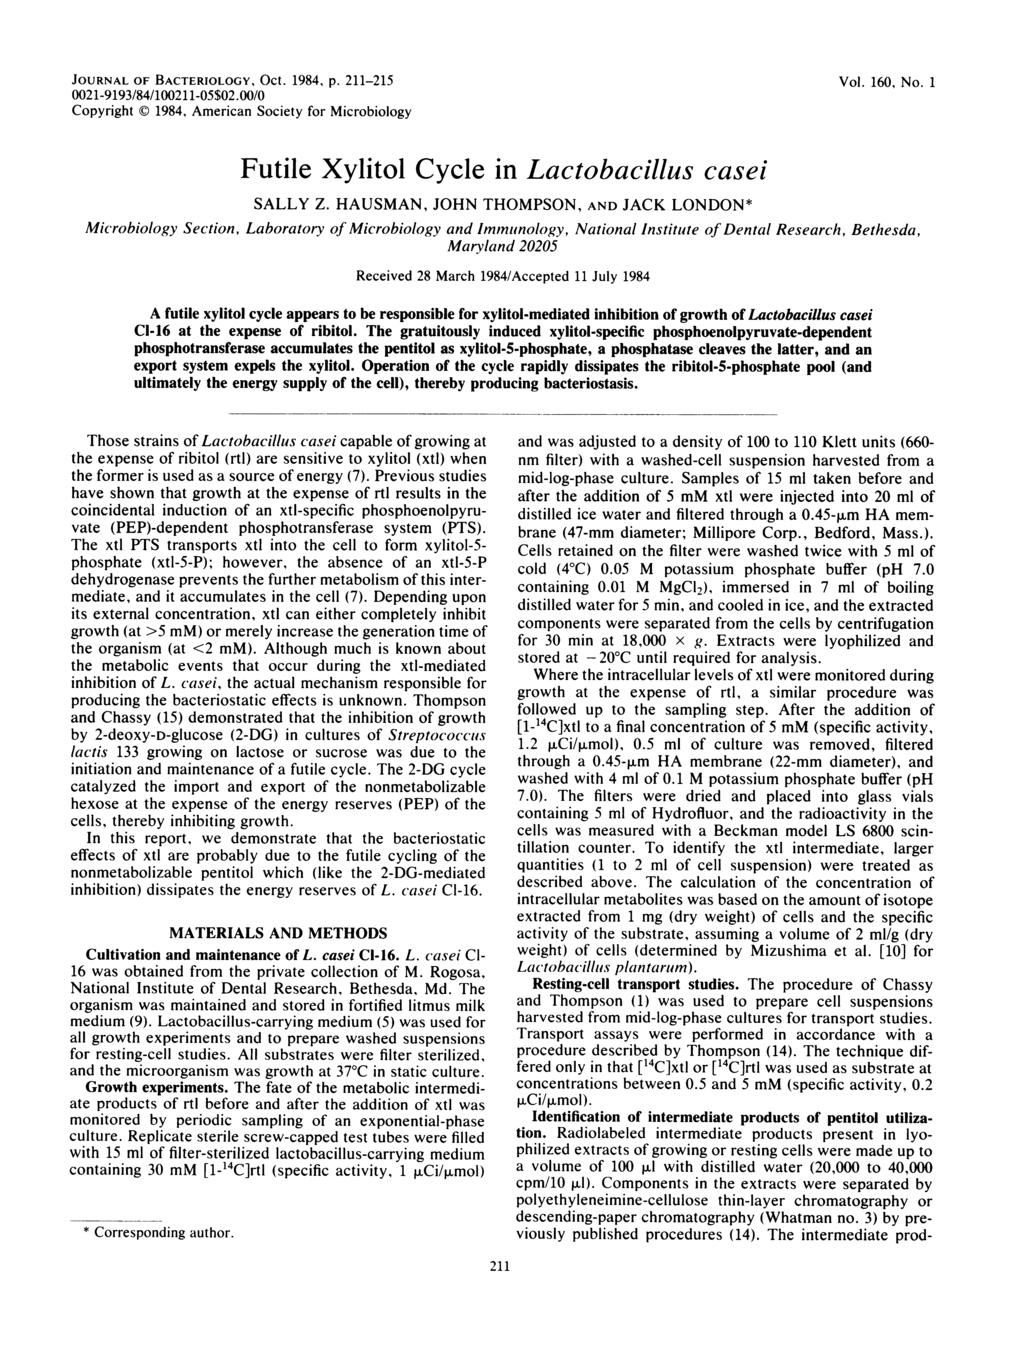 JOURNAL OF BACTERIOLOGY, Oct. 1984, p. 211-215 0021-9193/84/100211-05$02.00/0 Copyright 1984, American Society for Microbiology Vol. 160, No. 1 Futile Xylitol Cycle in Lactobacillus casei SALLY Z.